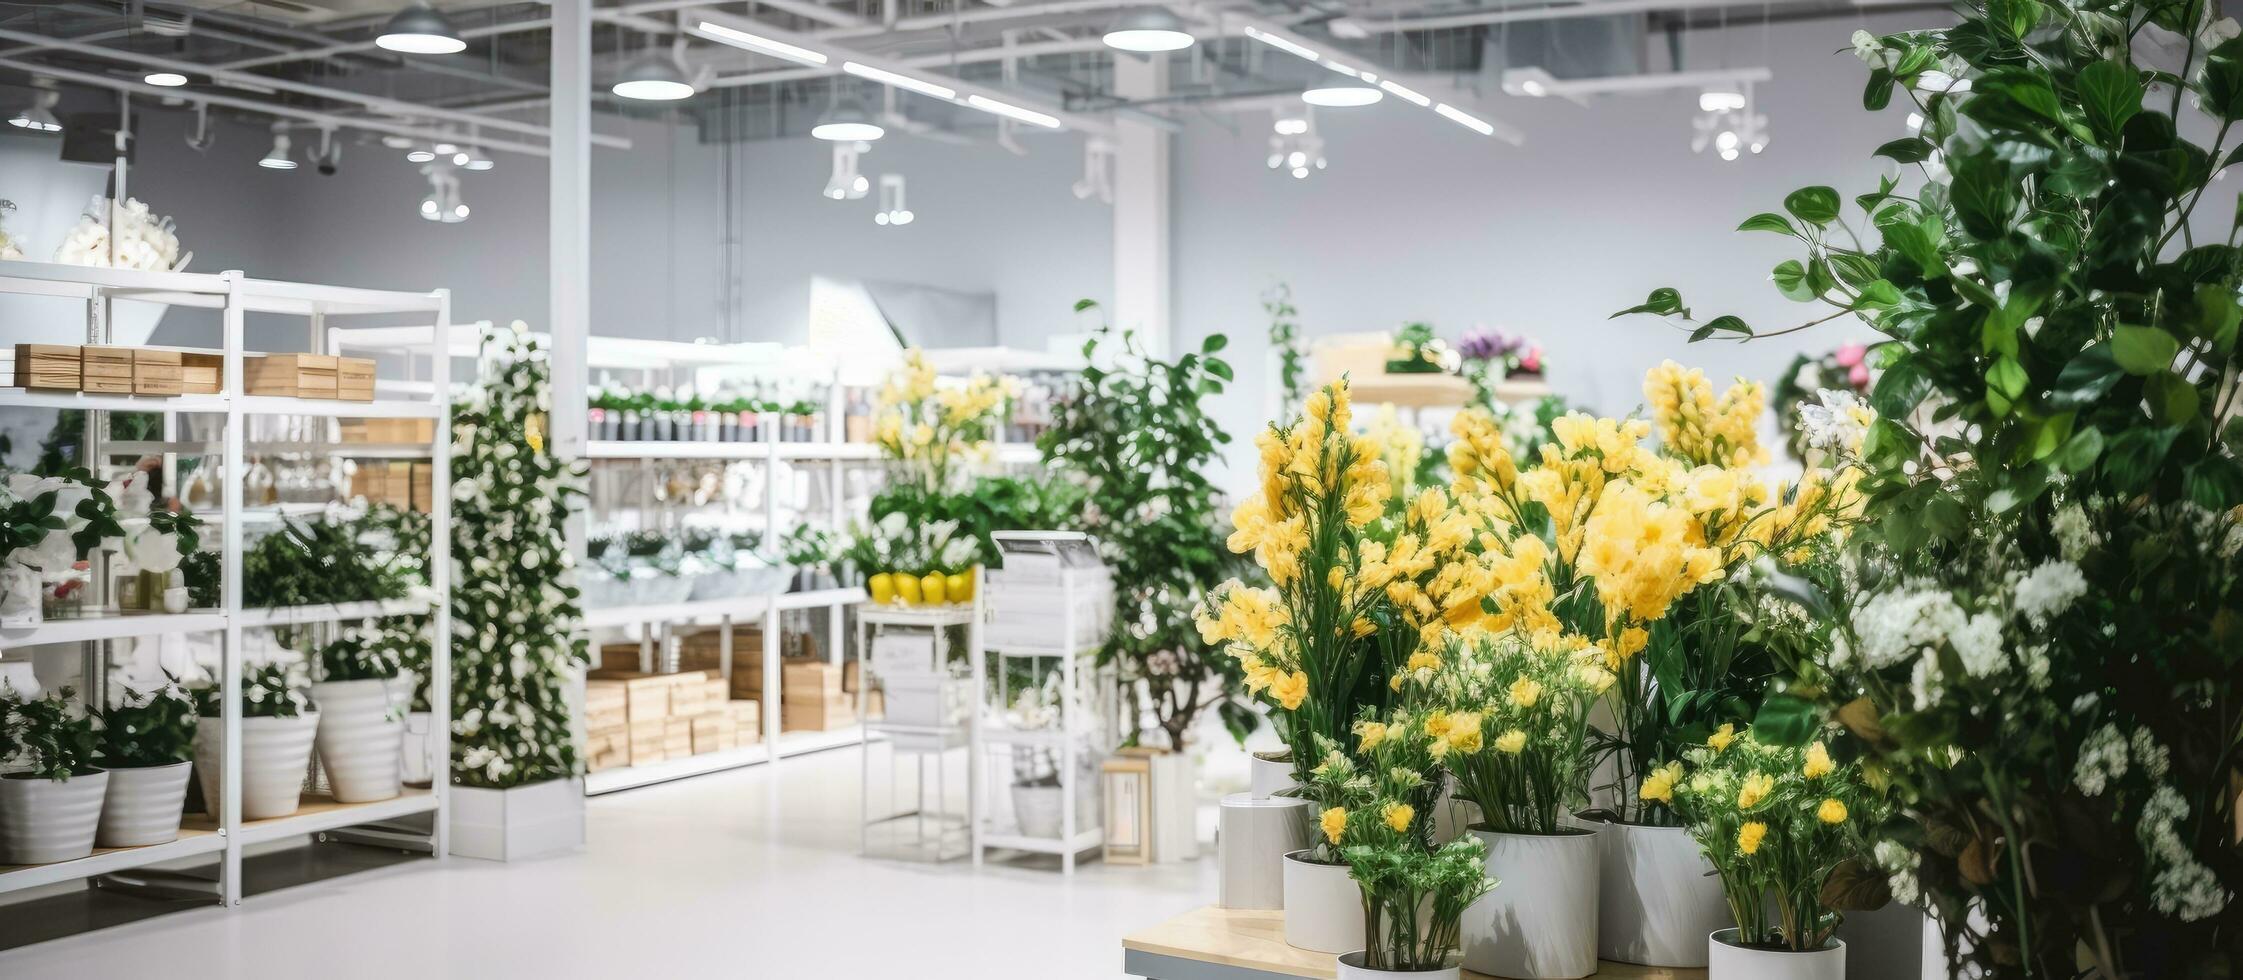 IKEA in Riga Latvia has artificial flowers in its interior photo